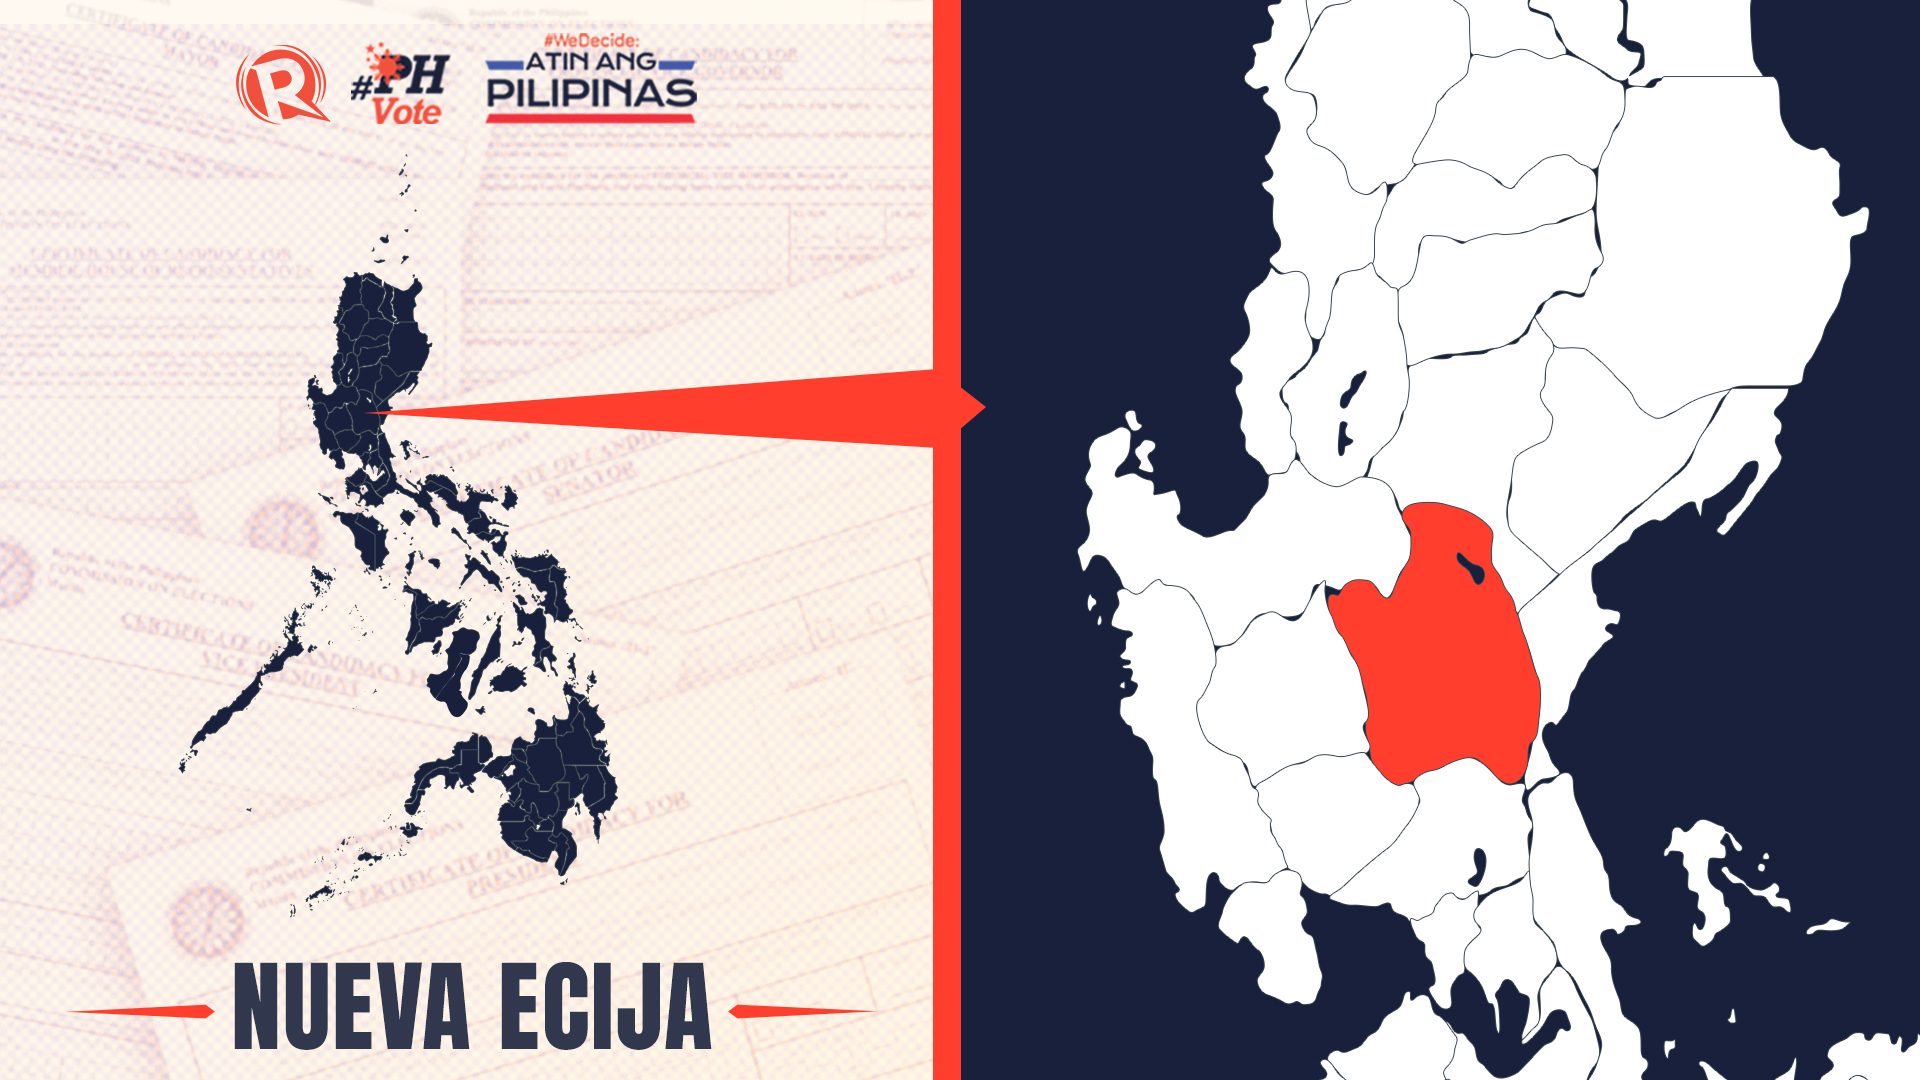 LIST: Who is running in Nueva Ecija in the 2022 Philippine elections?